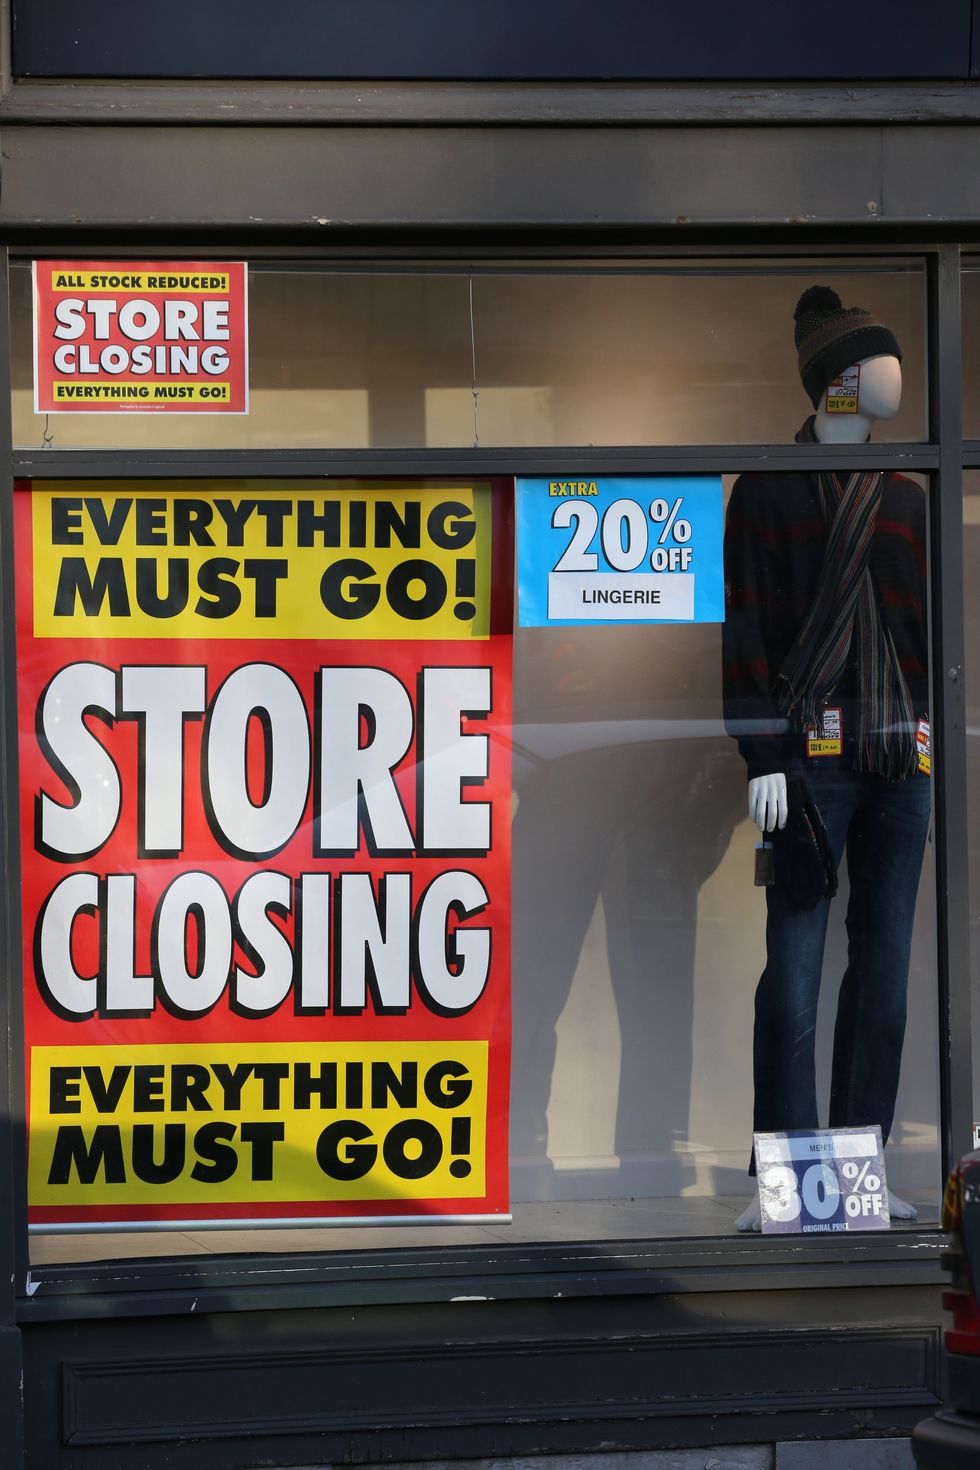 M&Co store closing sale sign in pictures